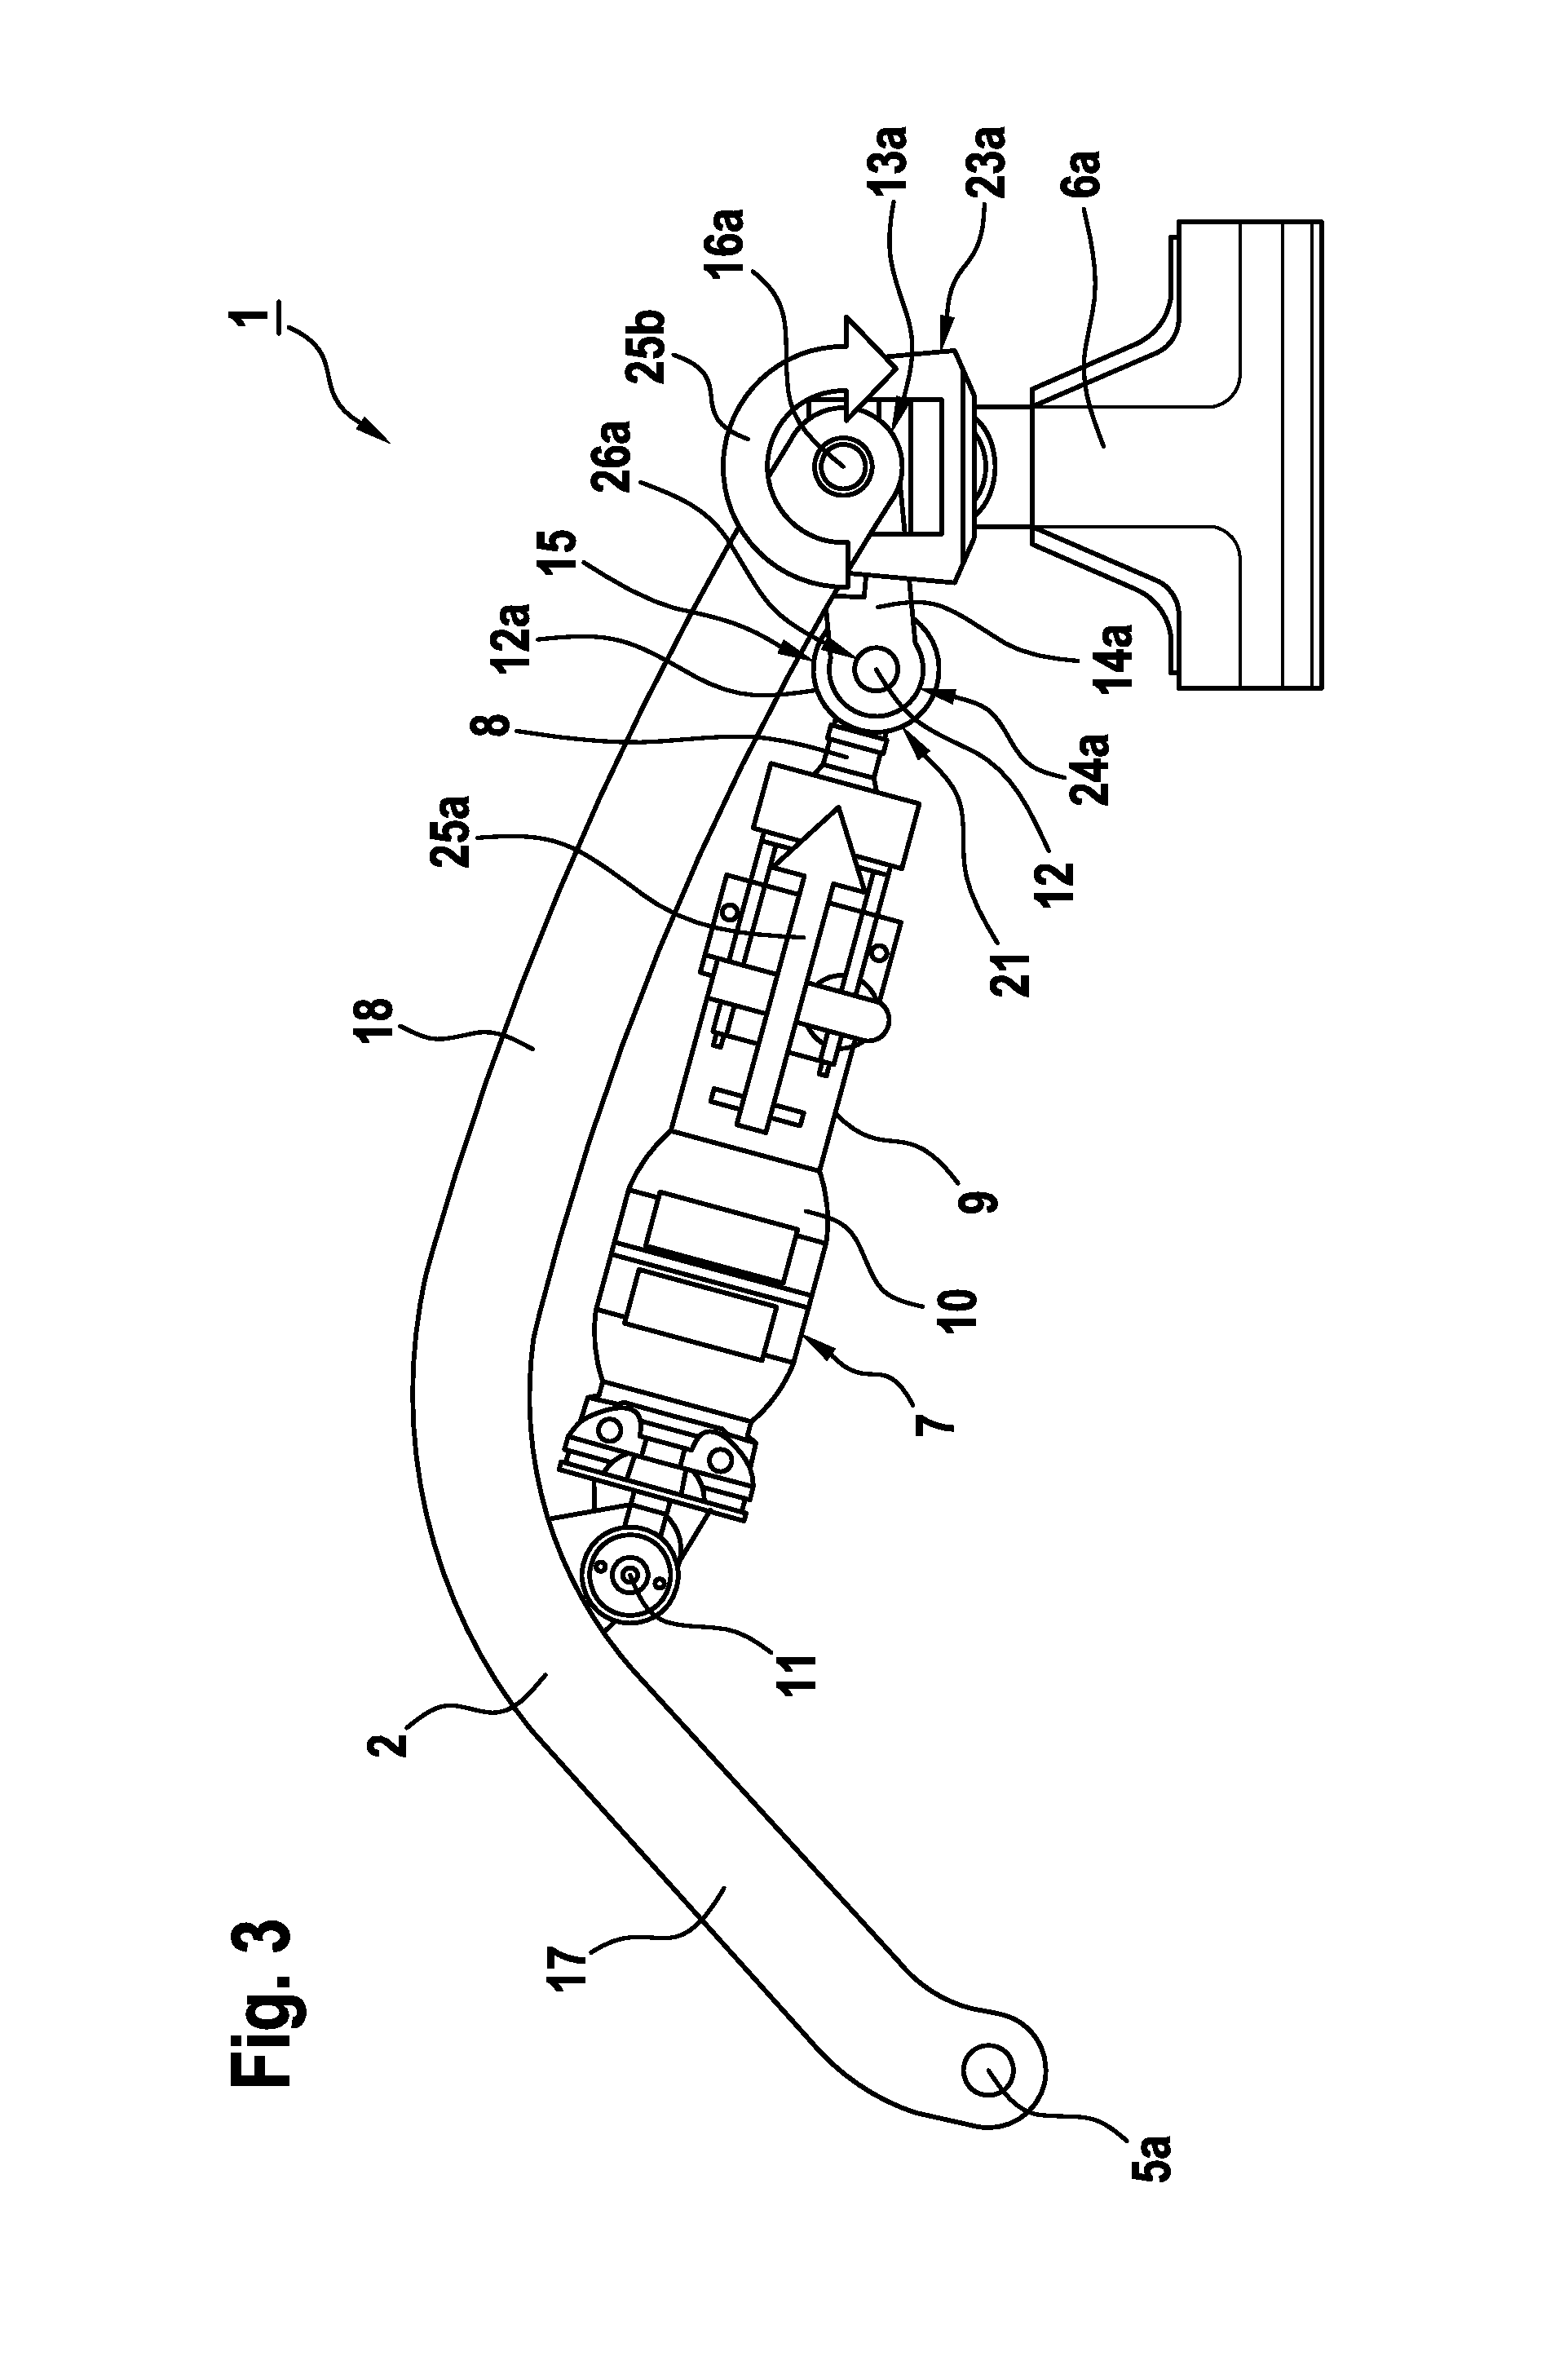 Actuator system for an actuatable door and an aircraft having such an actuatable door